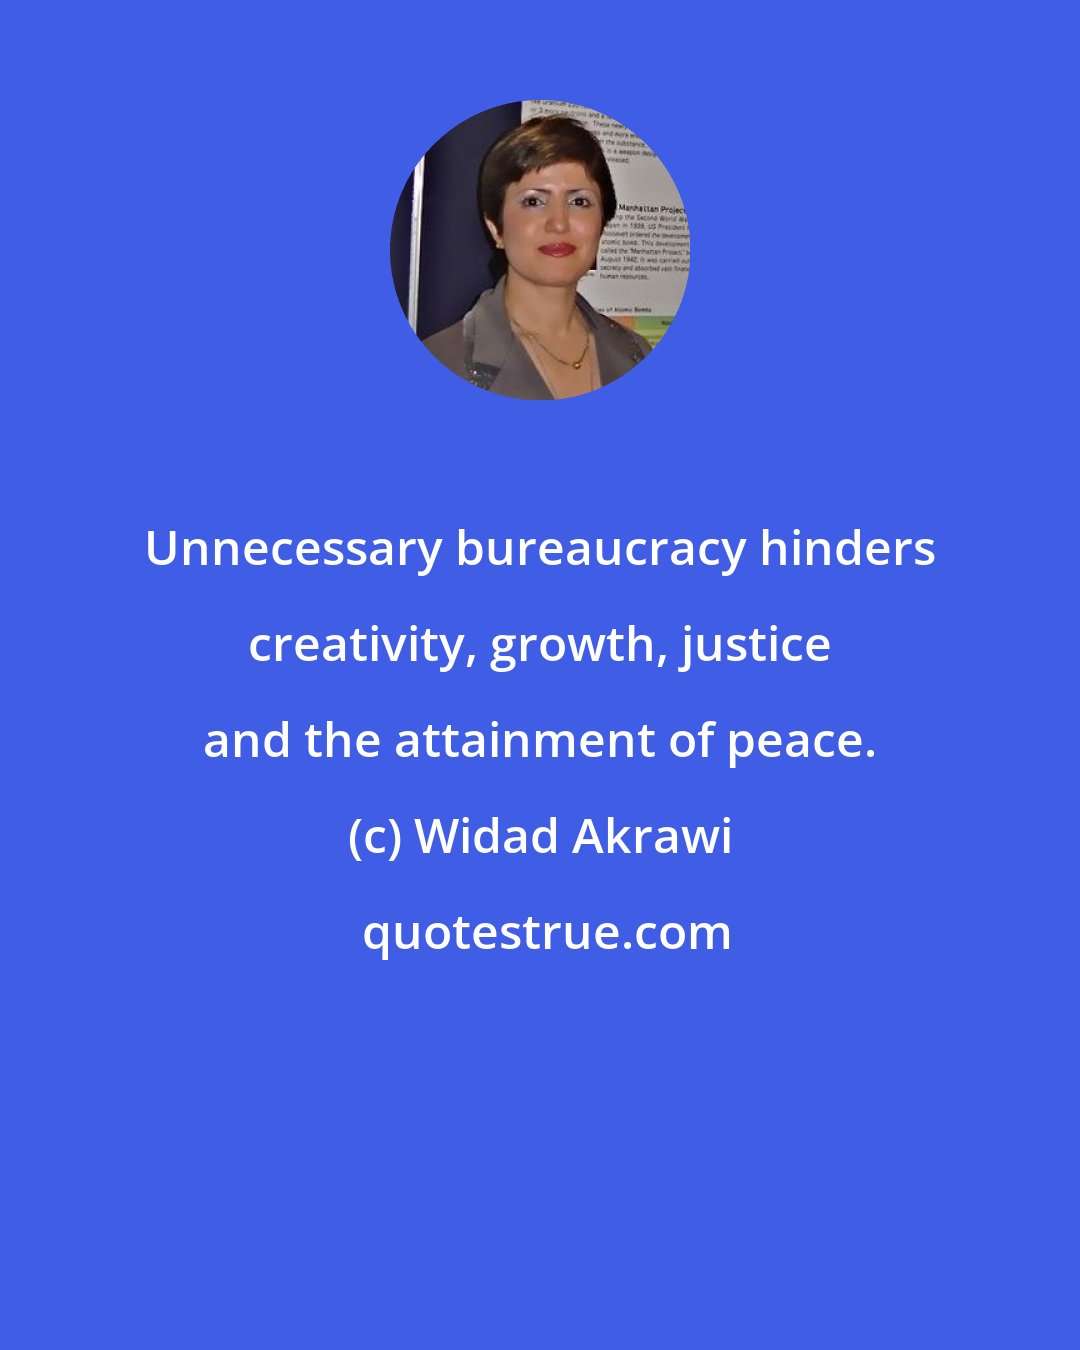 Widad Akrawi: Unnecessary bureaucracy hinders creativity, growth, justice and the attainment of peace.